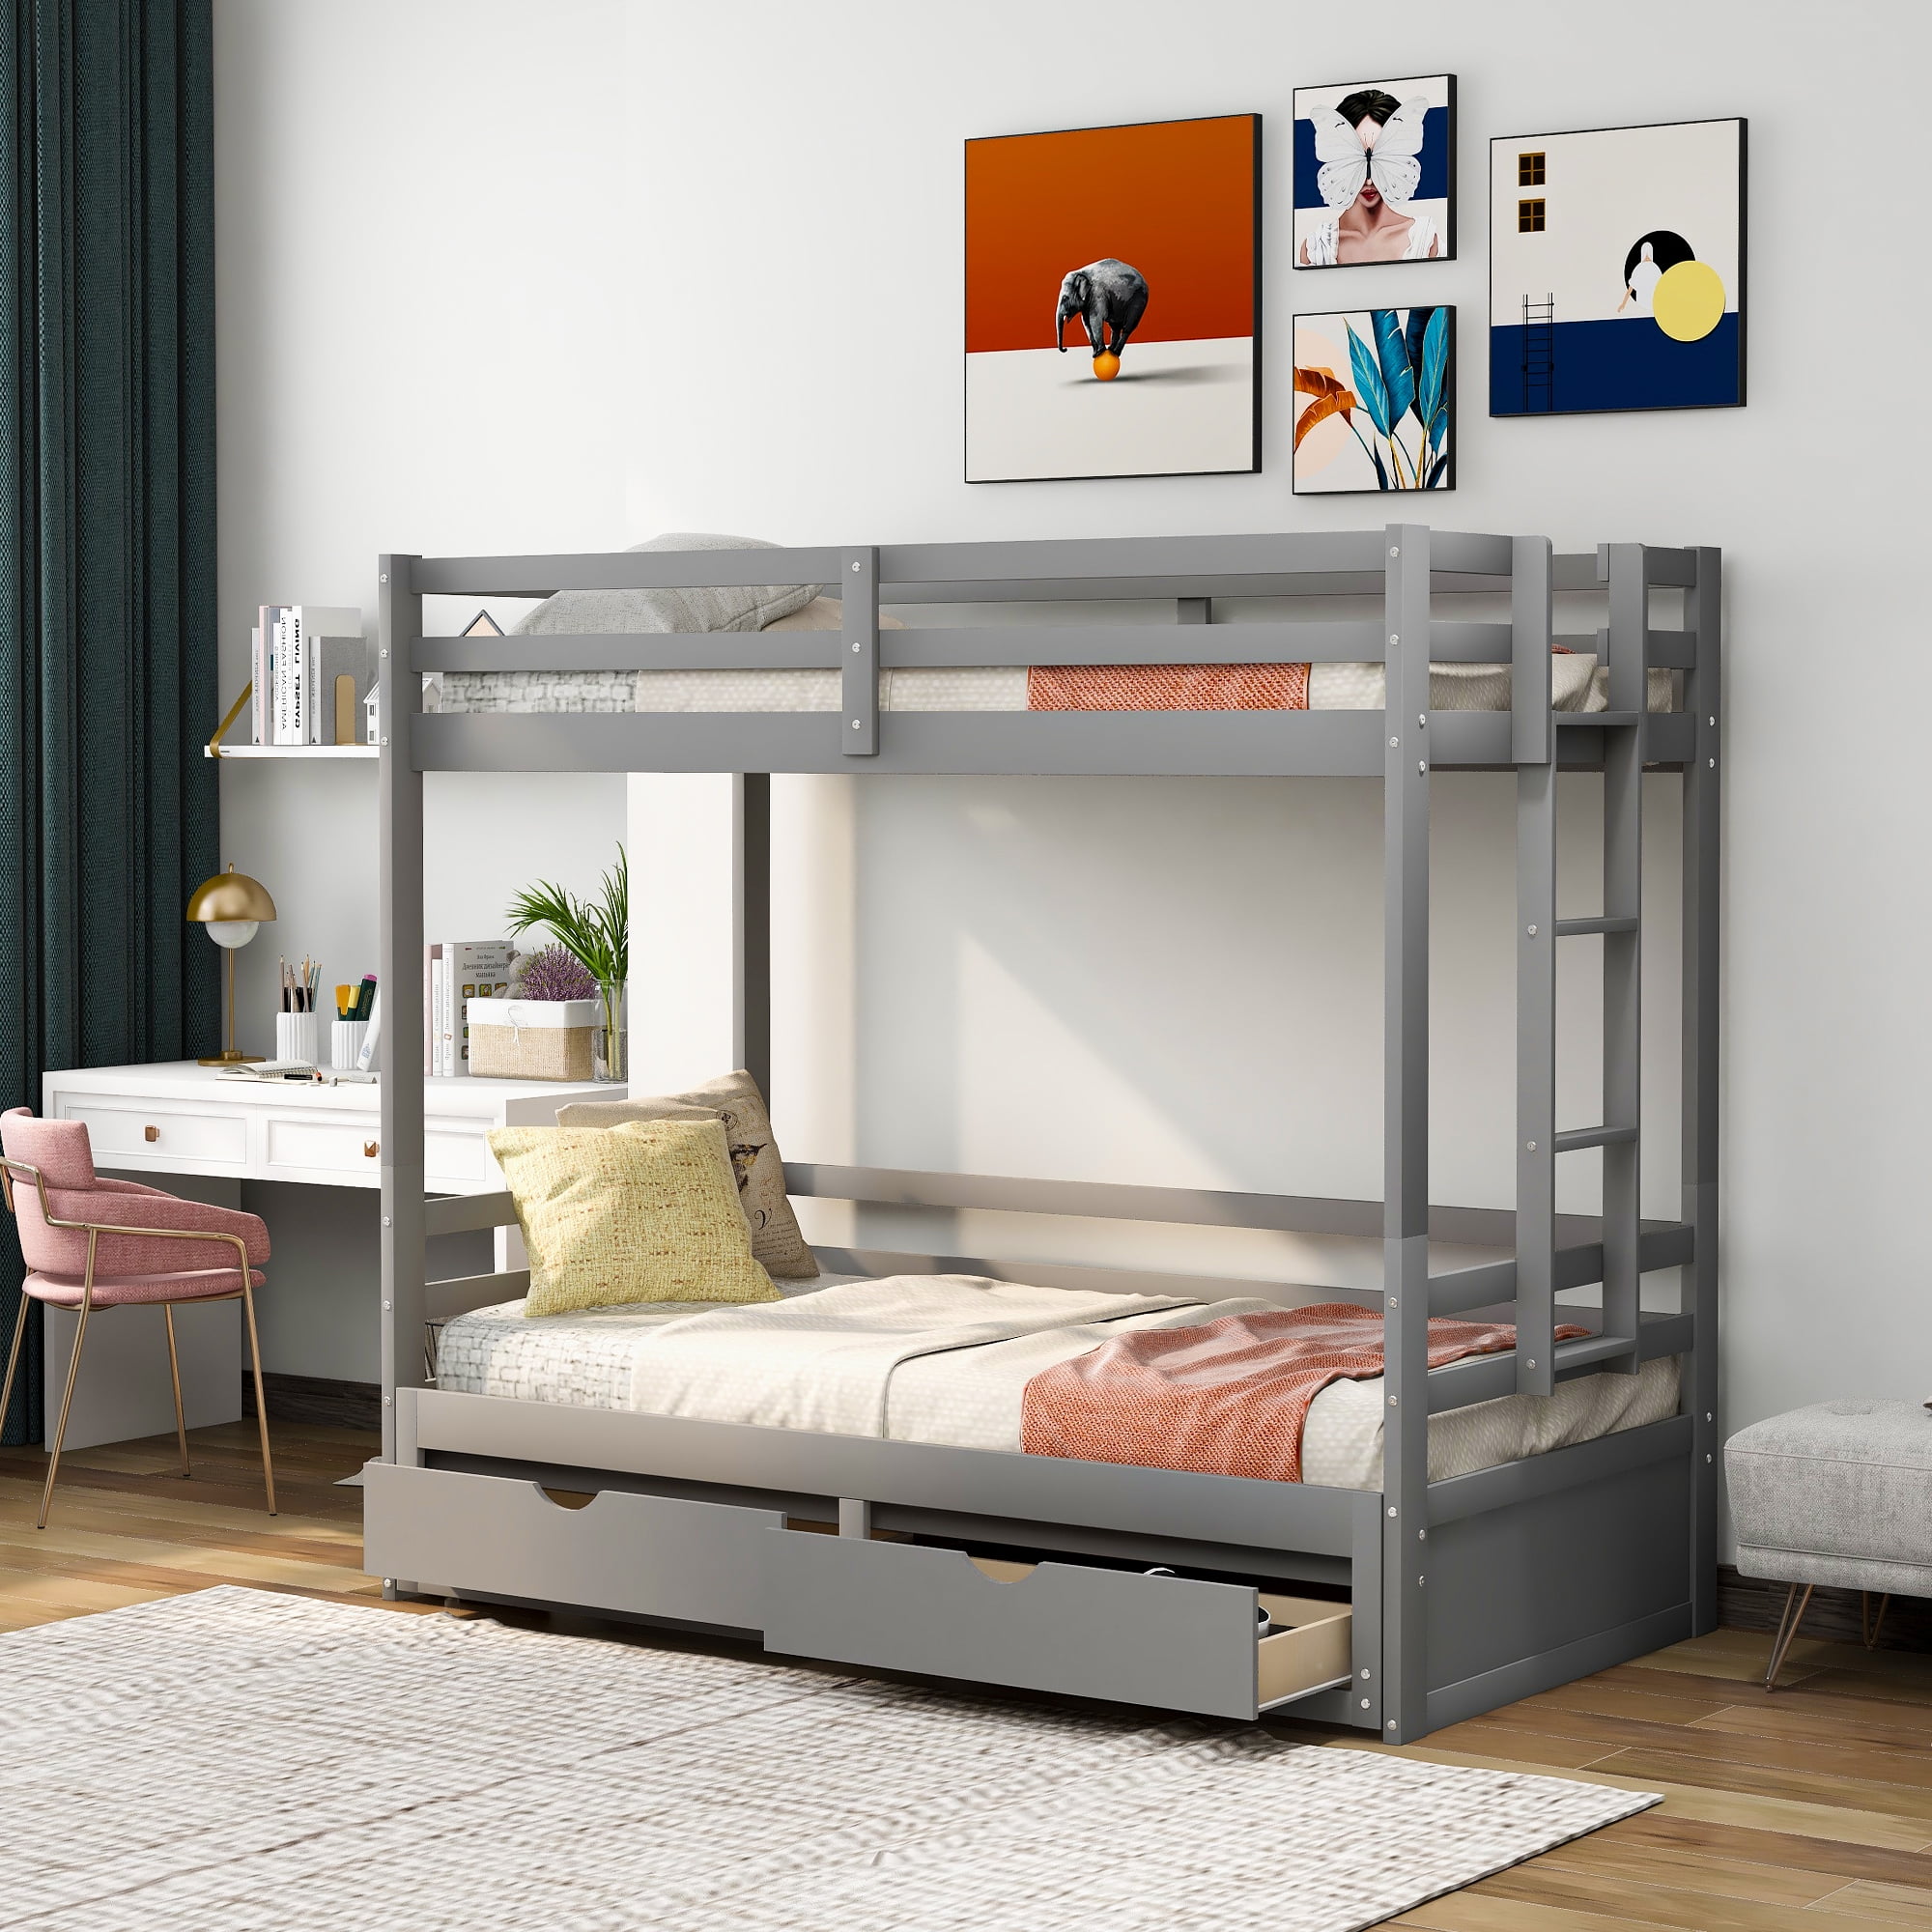 Euroco Wood Twin Over King Bunk Bed Or, Twin Over King Bunk Bed